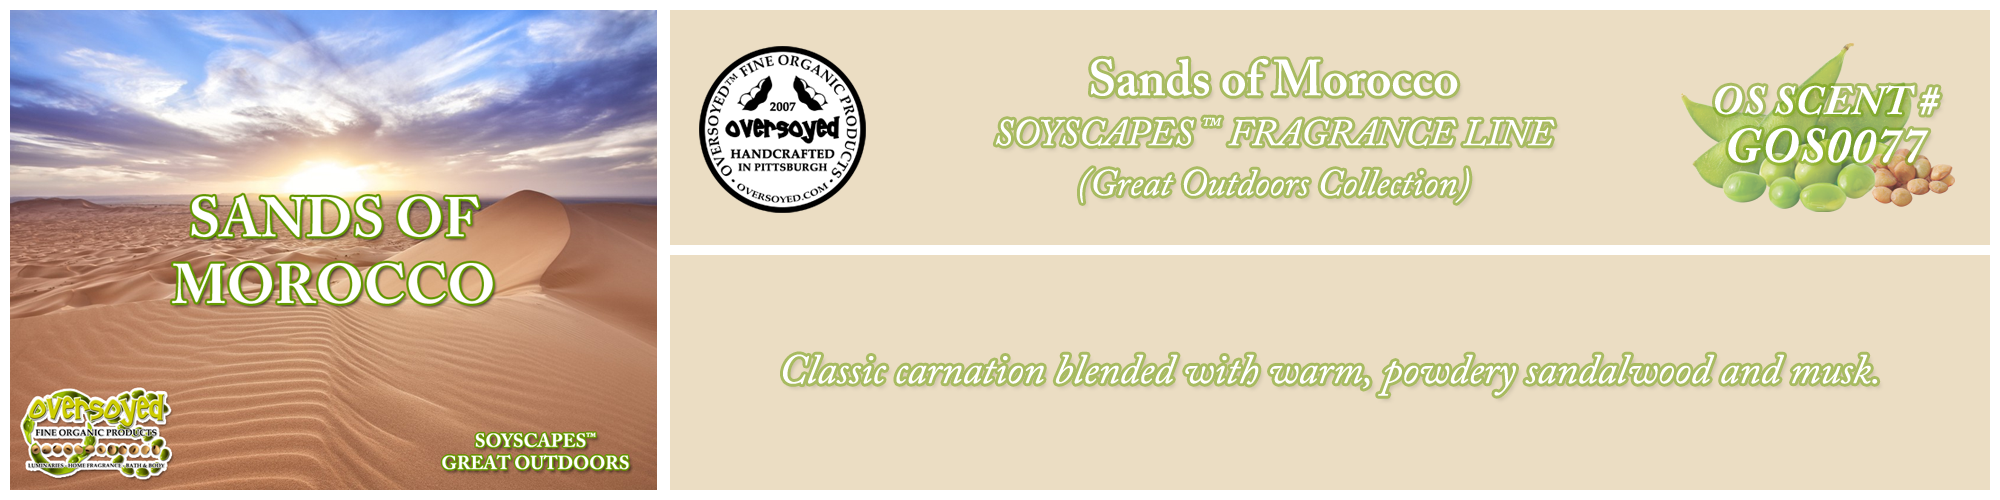 Sands Of Morocco Handcrafted Products Collection